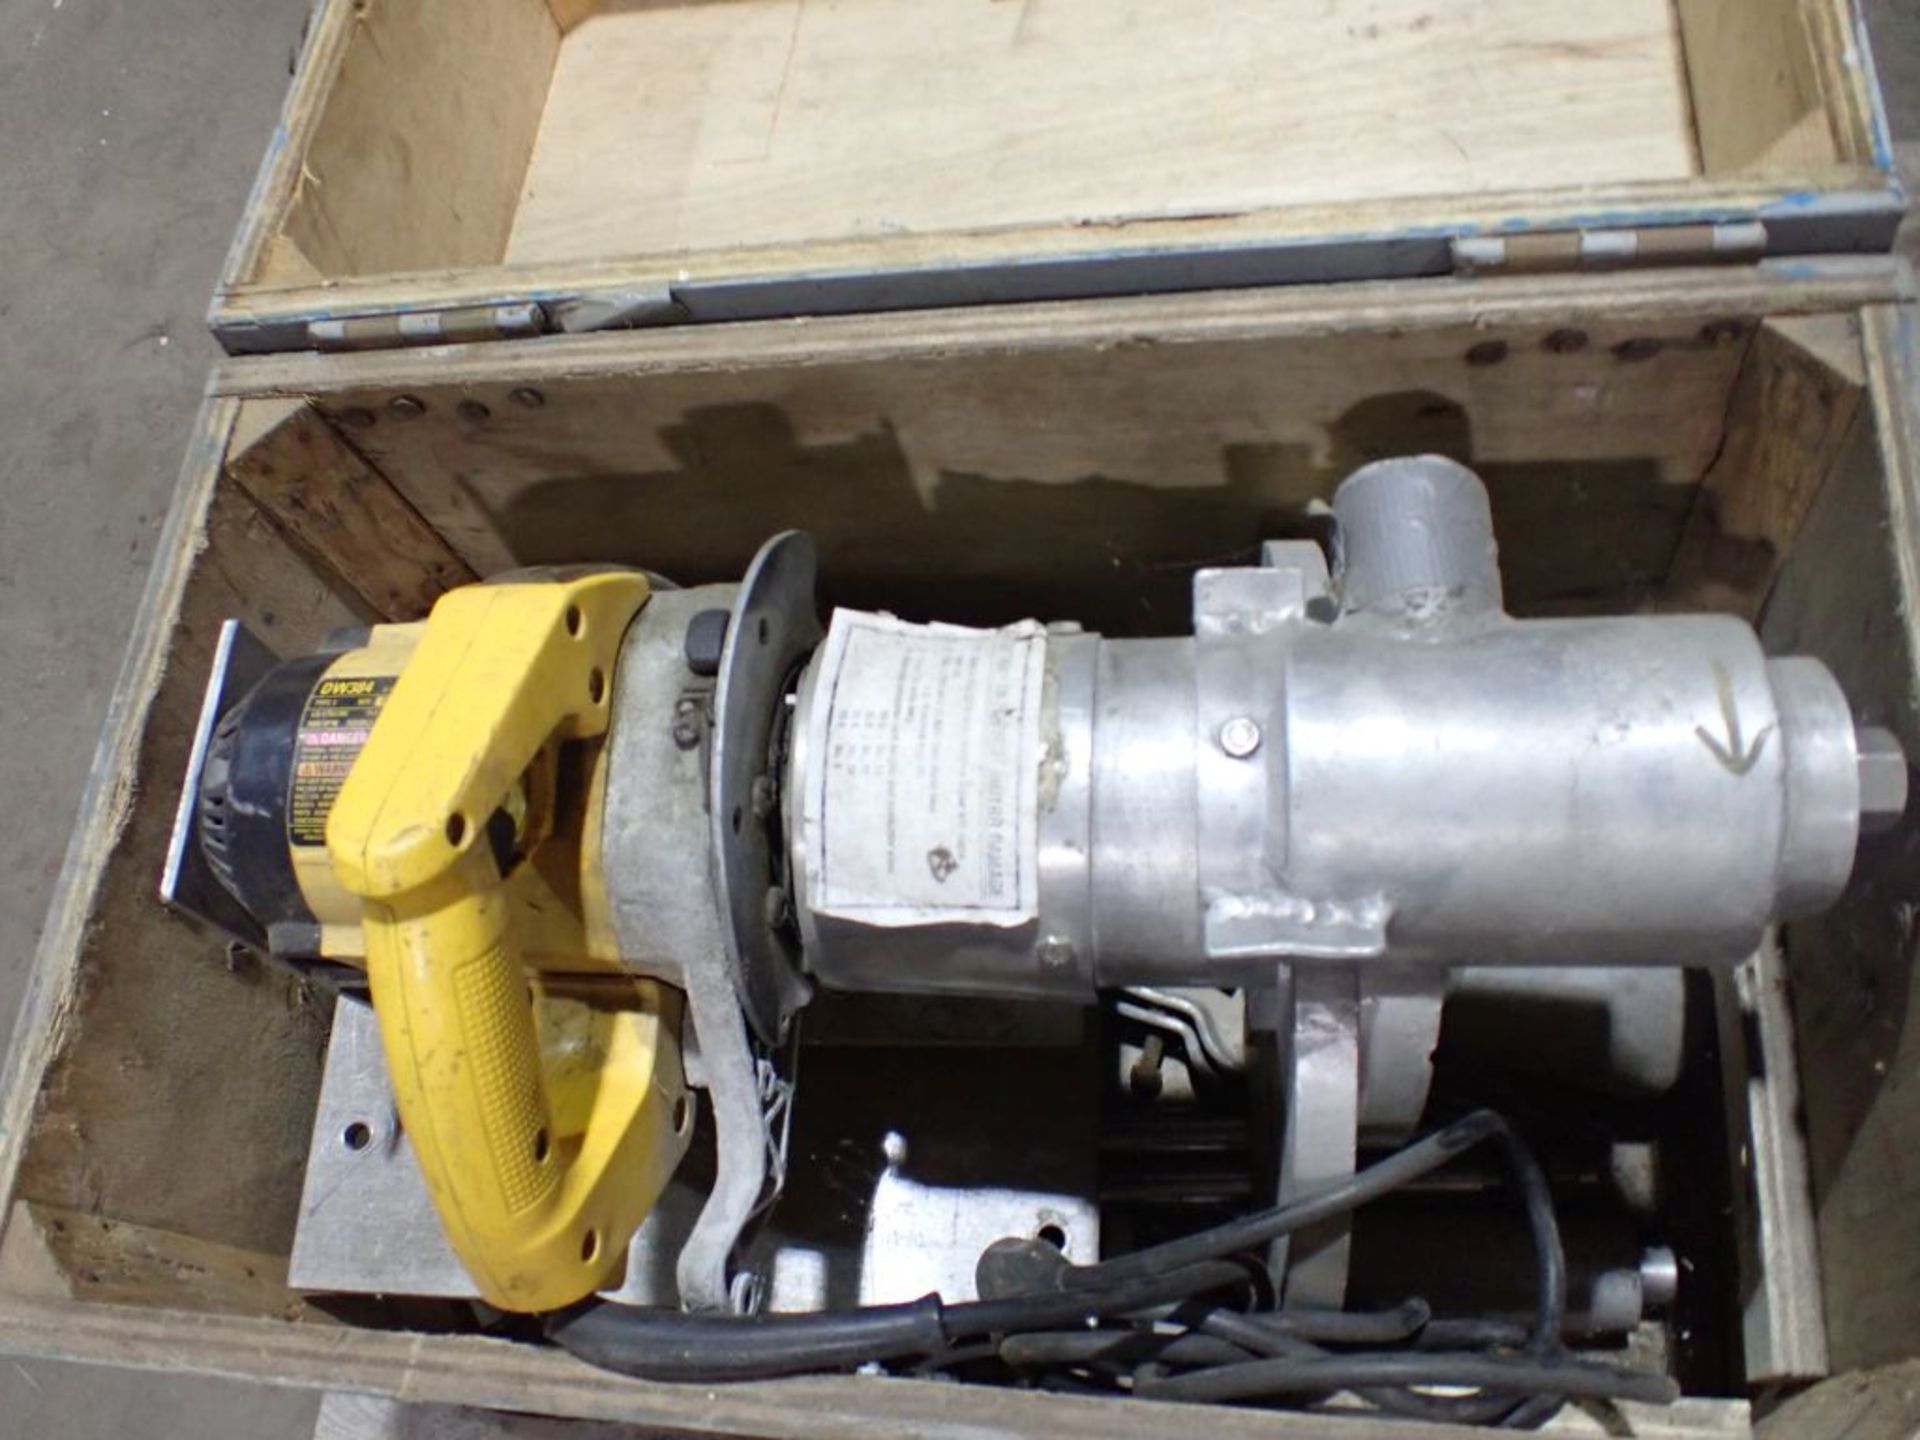 DeWalt Circular Saw Attached to Shop Made Tool | Model No. DW 384; Type: 3; 15A; 120V; 5800 RPM; - Image 4 of 7